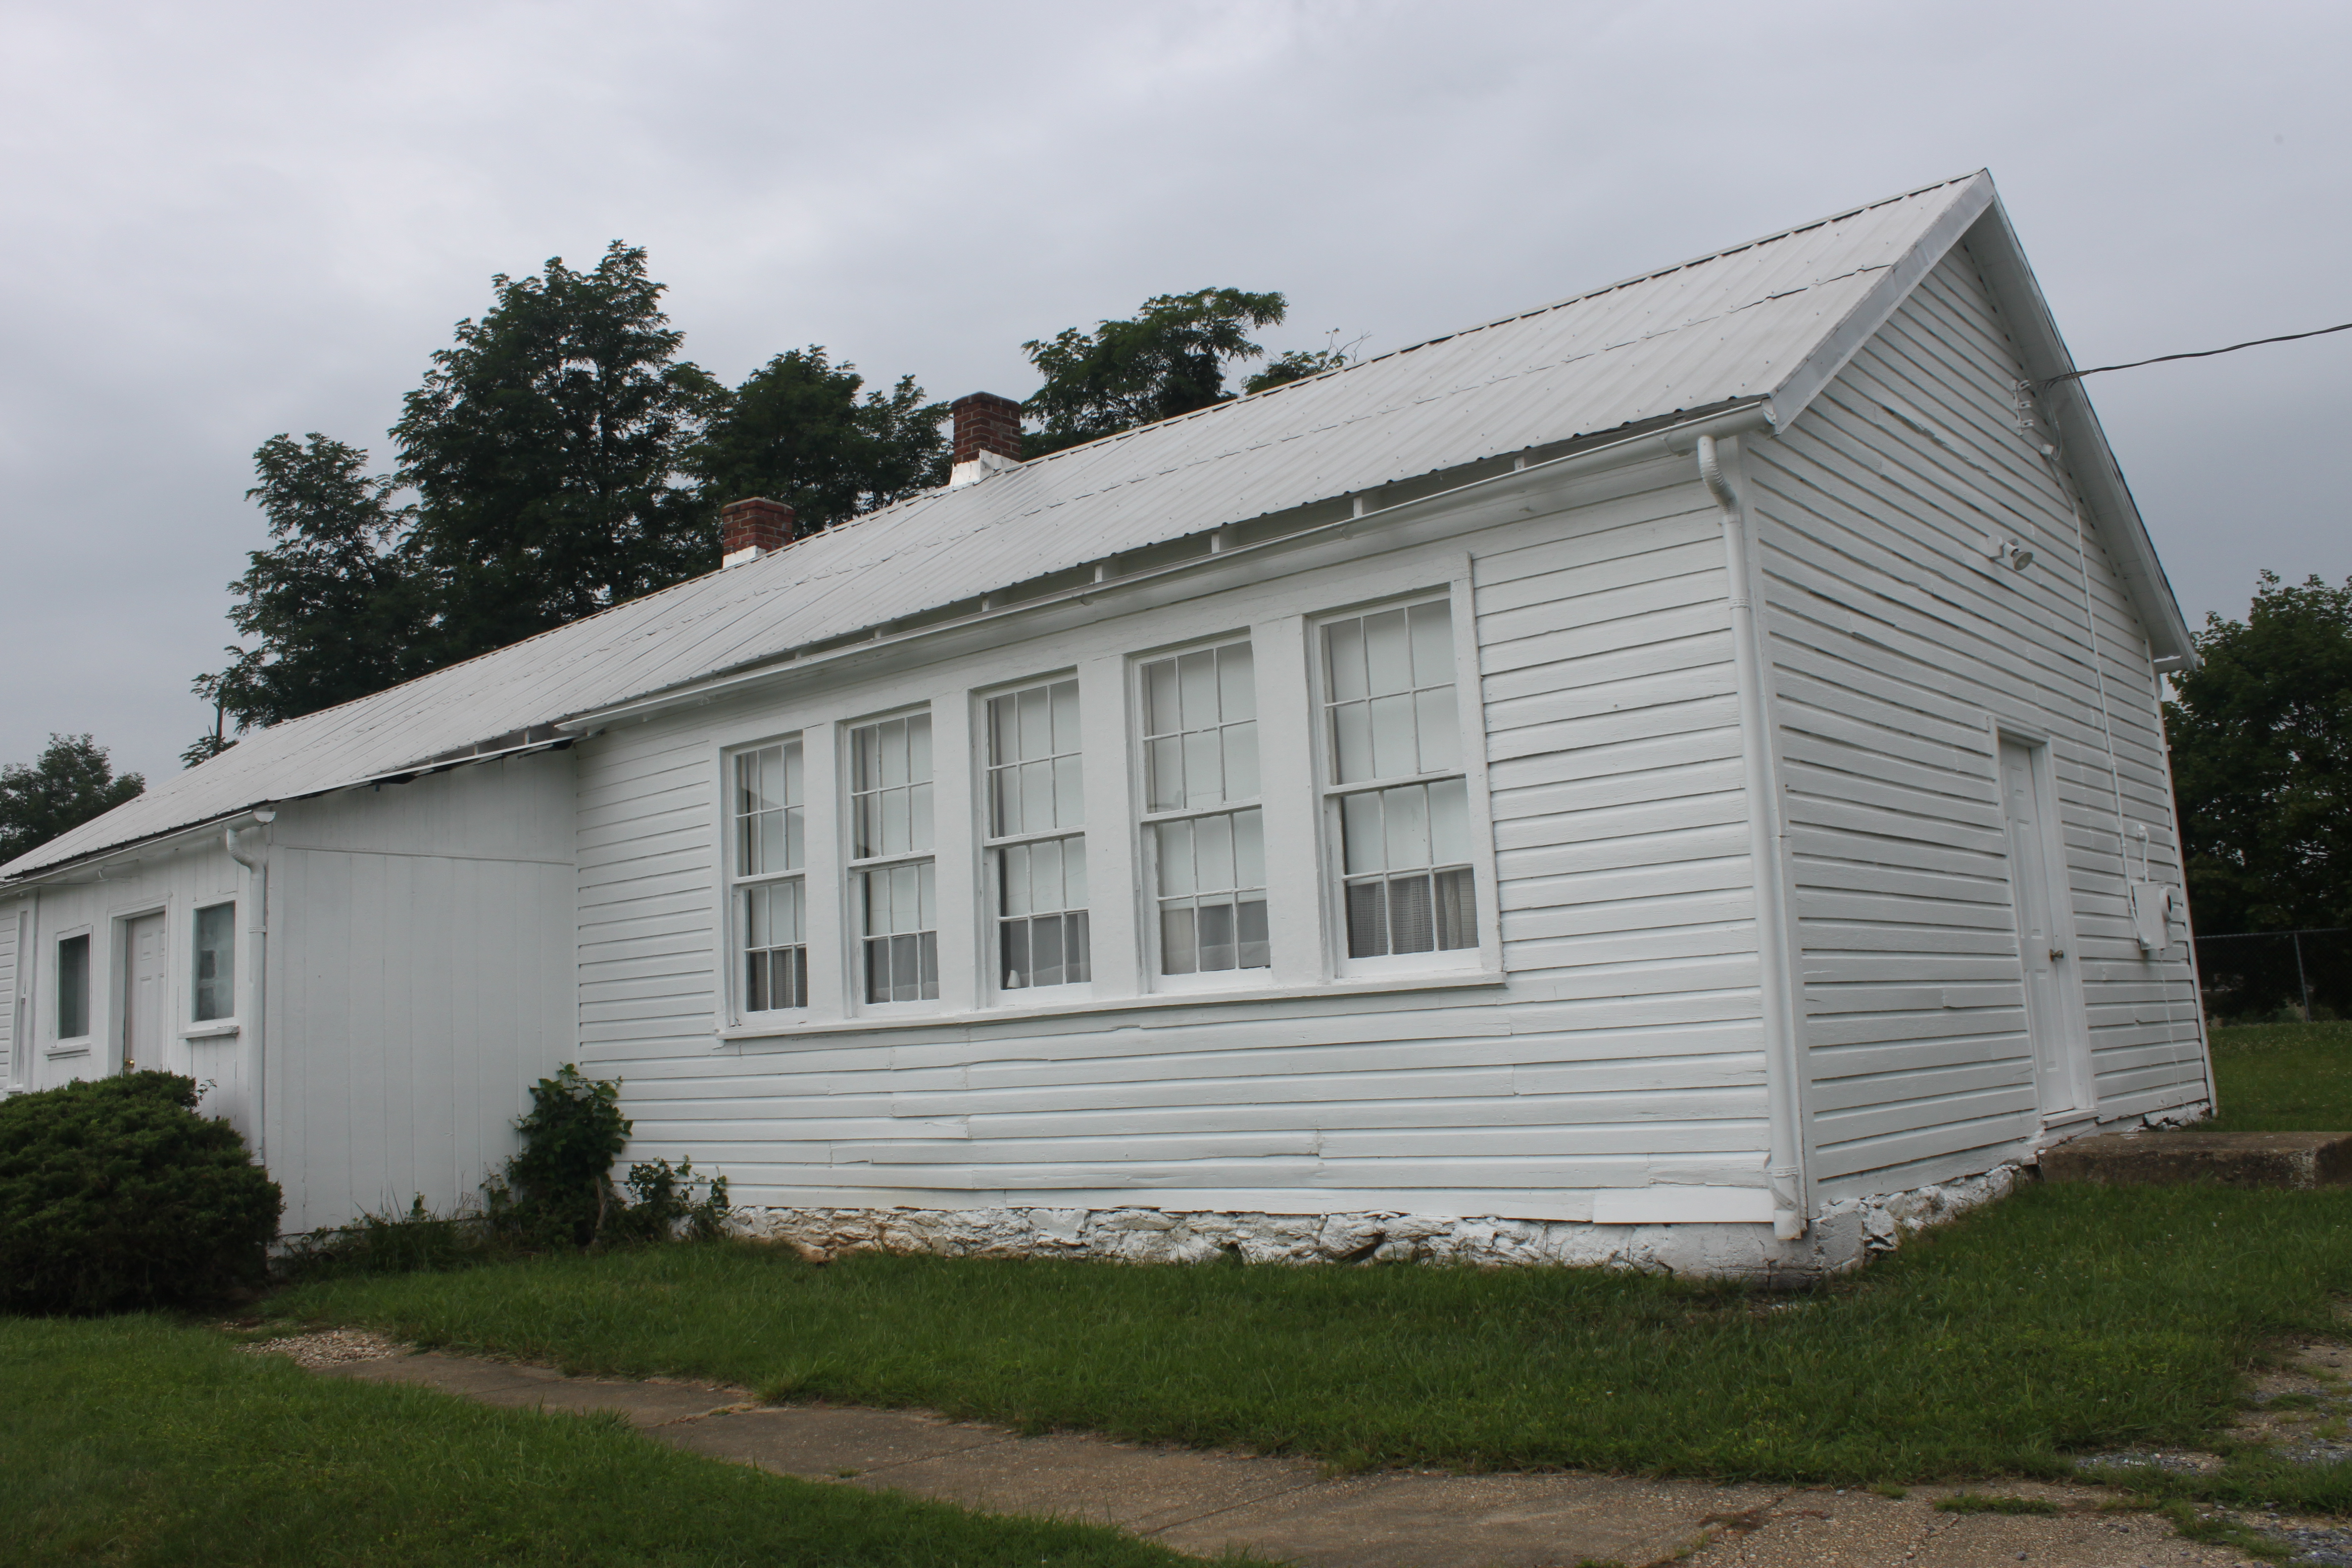 The school building on the grounds of Pleasant View Historical Site